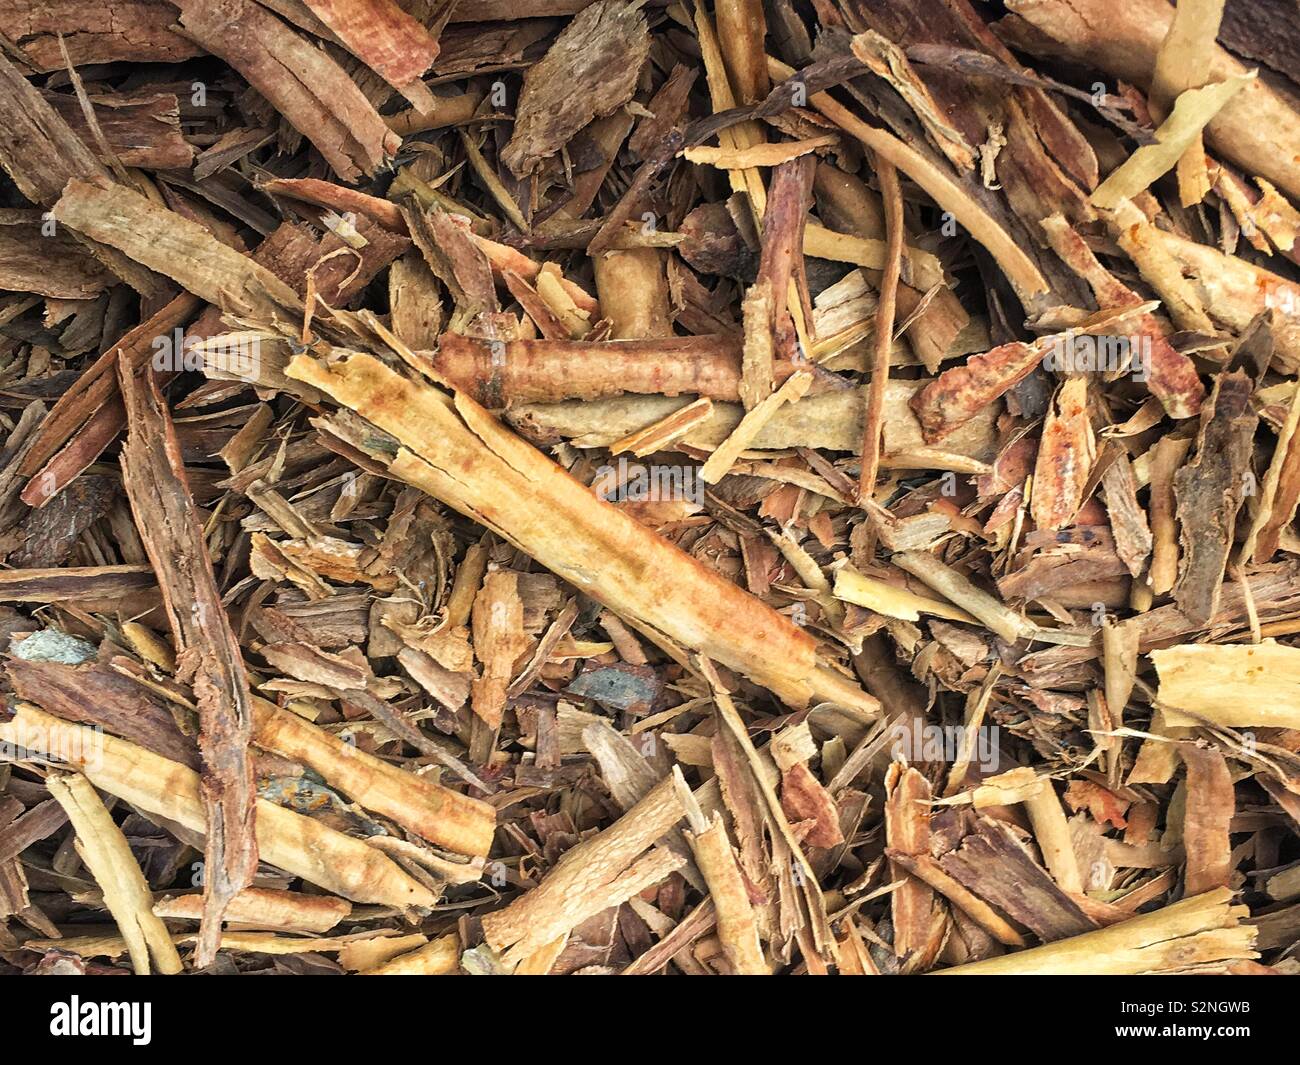 Full frame of dried Mexican cinnamon for sale as fresh produce. Stock Photo